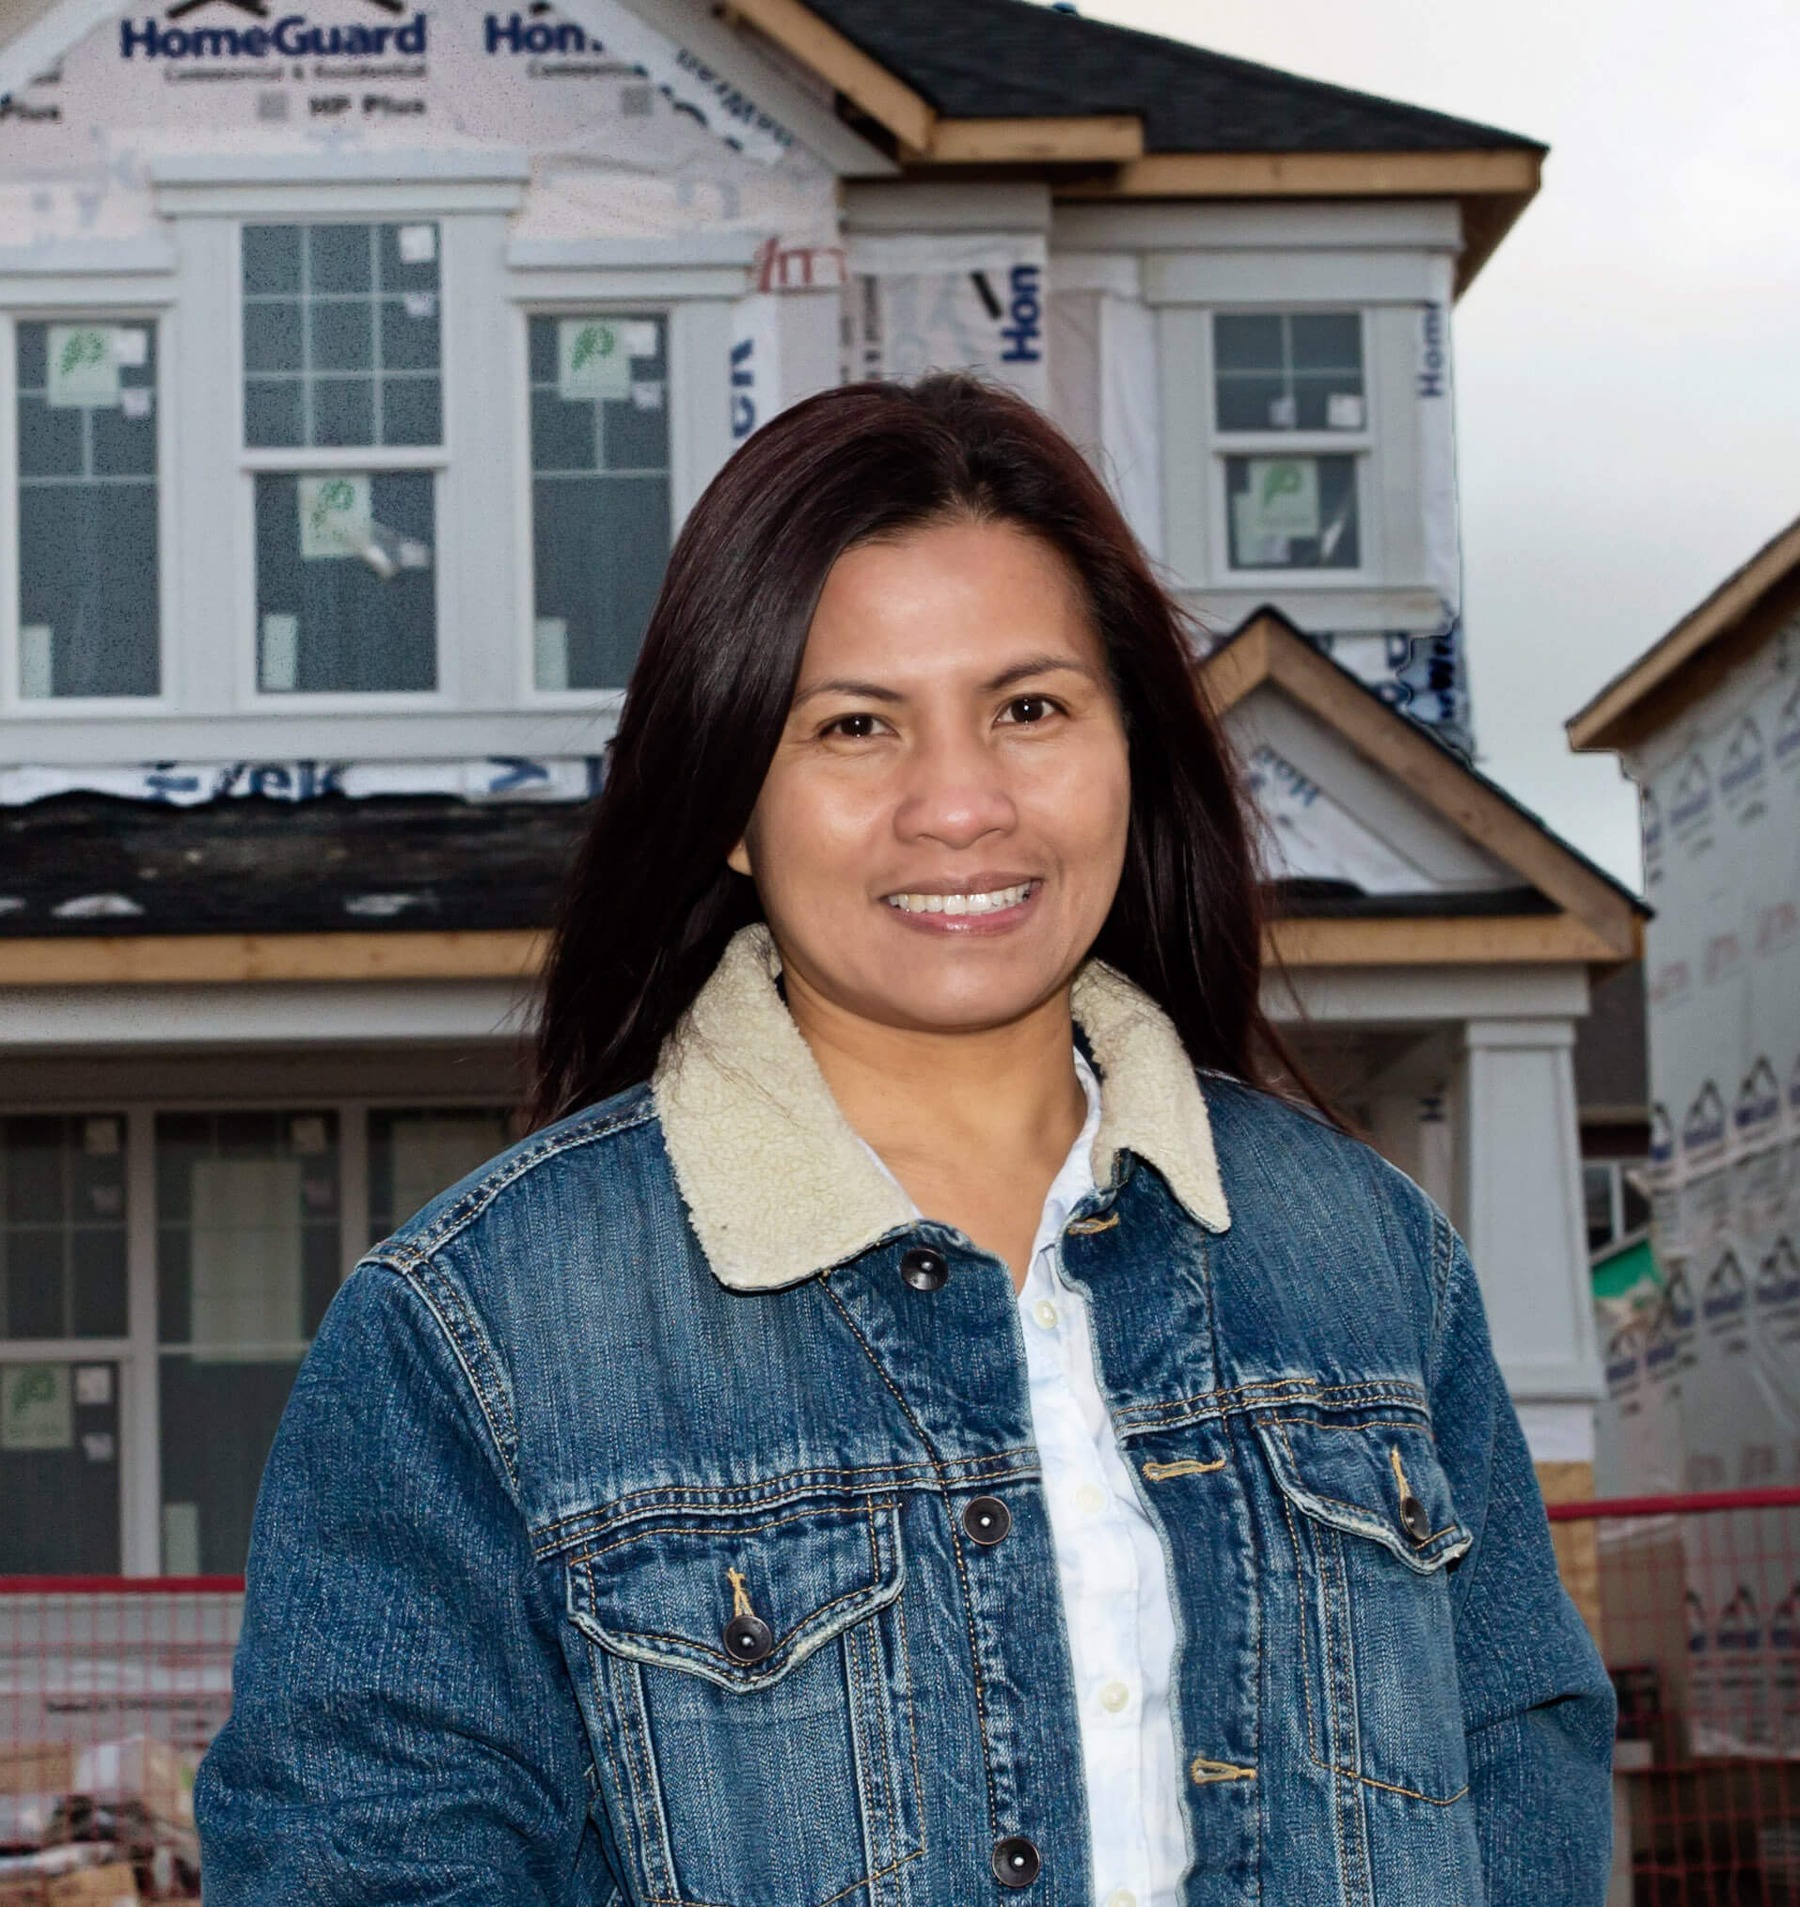 Head and shoulders portrait of a woman of Asian descent, standing in front of a row of homes being built, smiling at the camera.